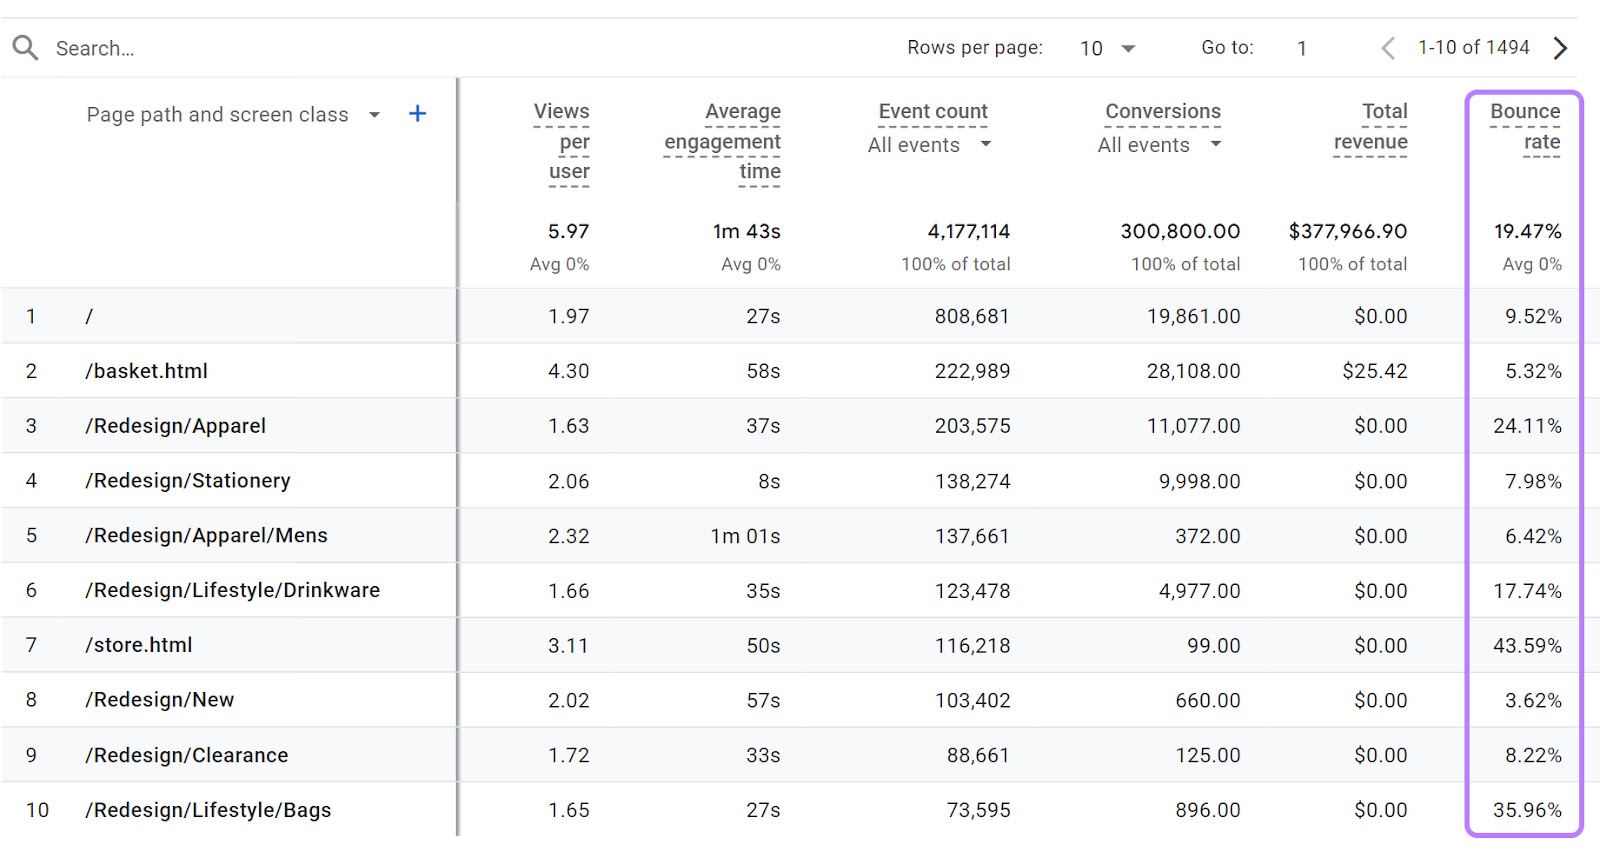 "Bounce rate" column highlighted in the Pages and screens table